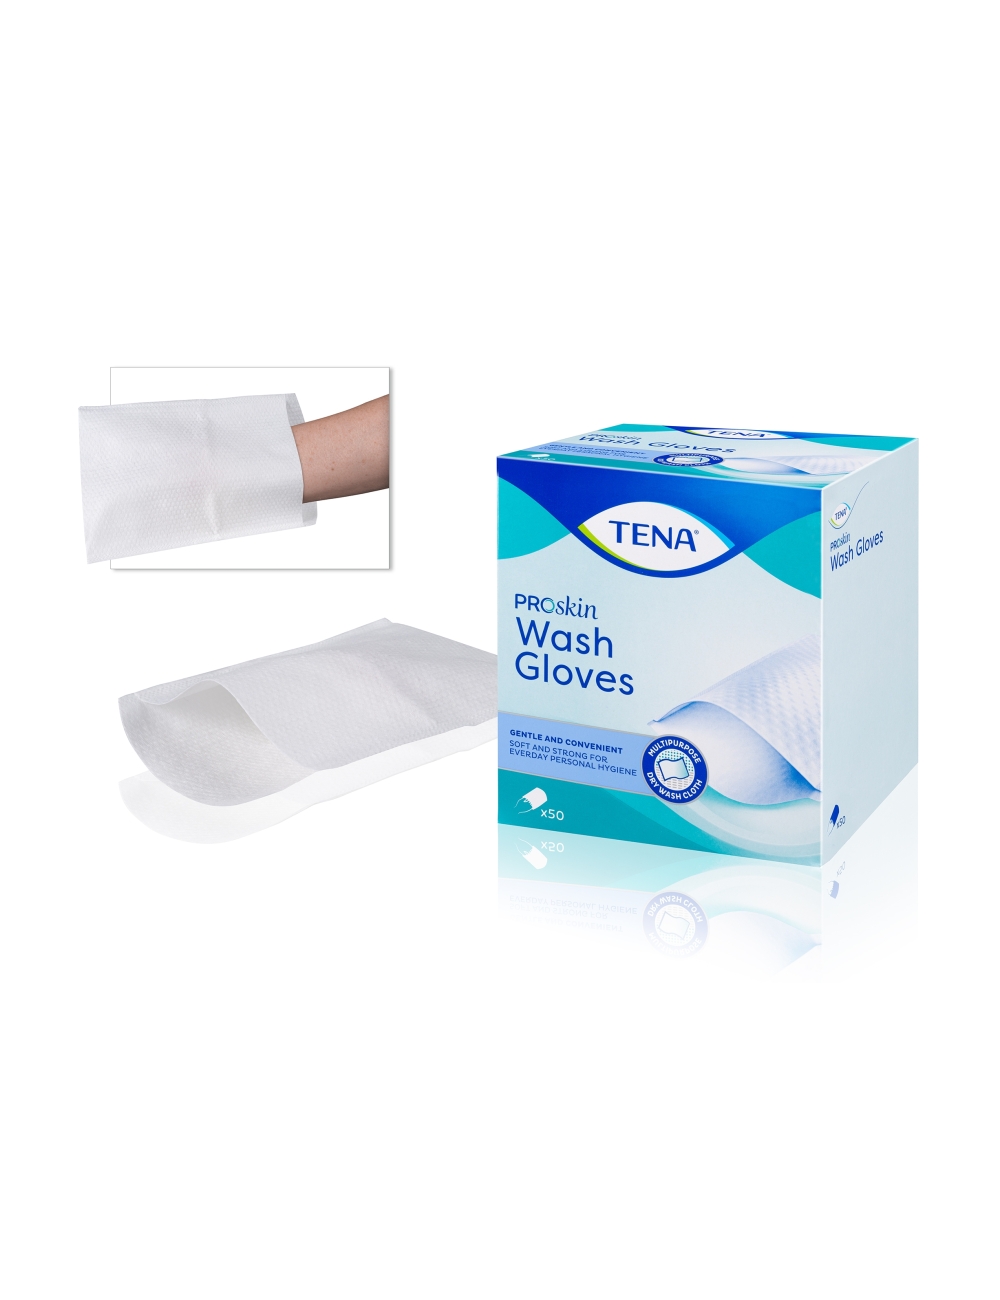 GANTS HYGIENE A USAGE UNIQUE SEC SOFT AND STRONG PROSKIN TENA (x50)